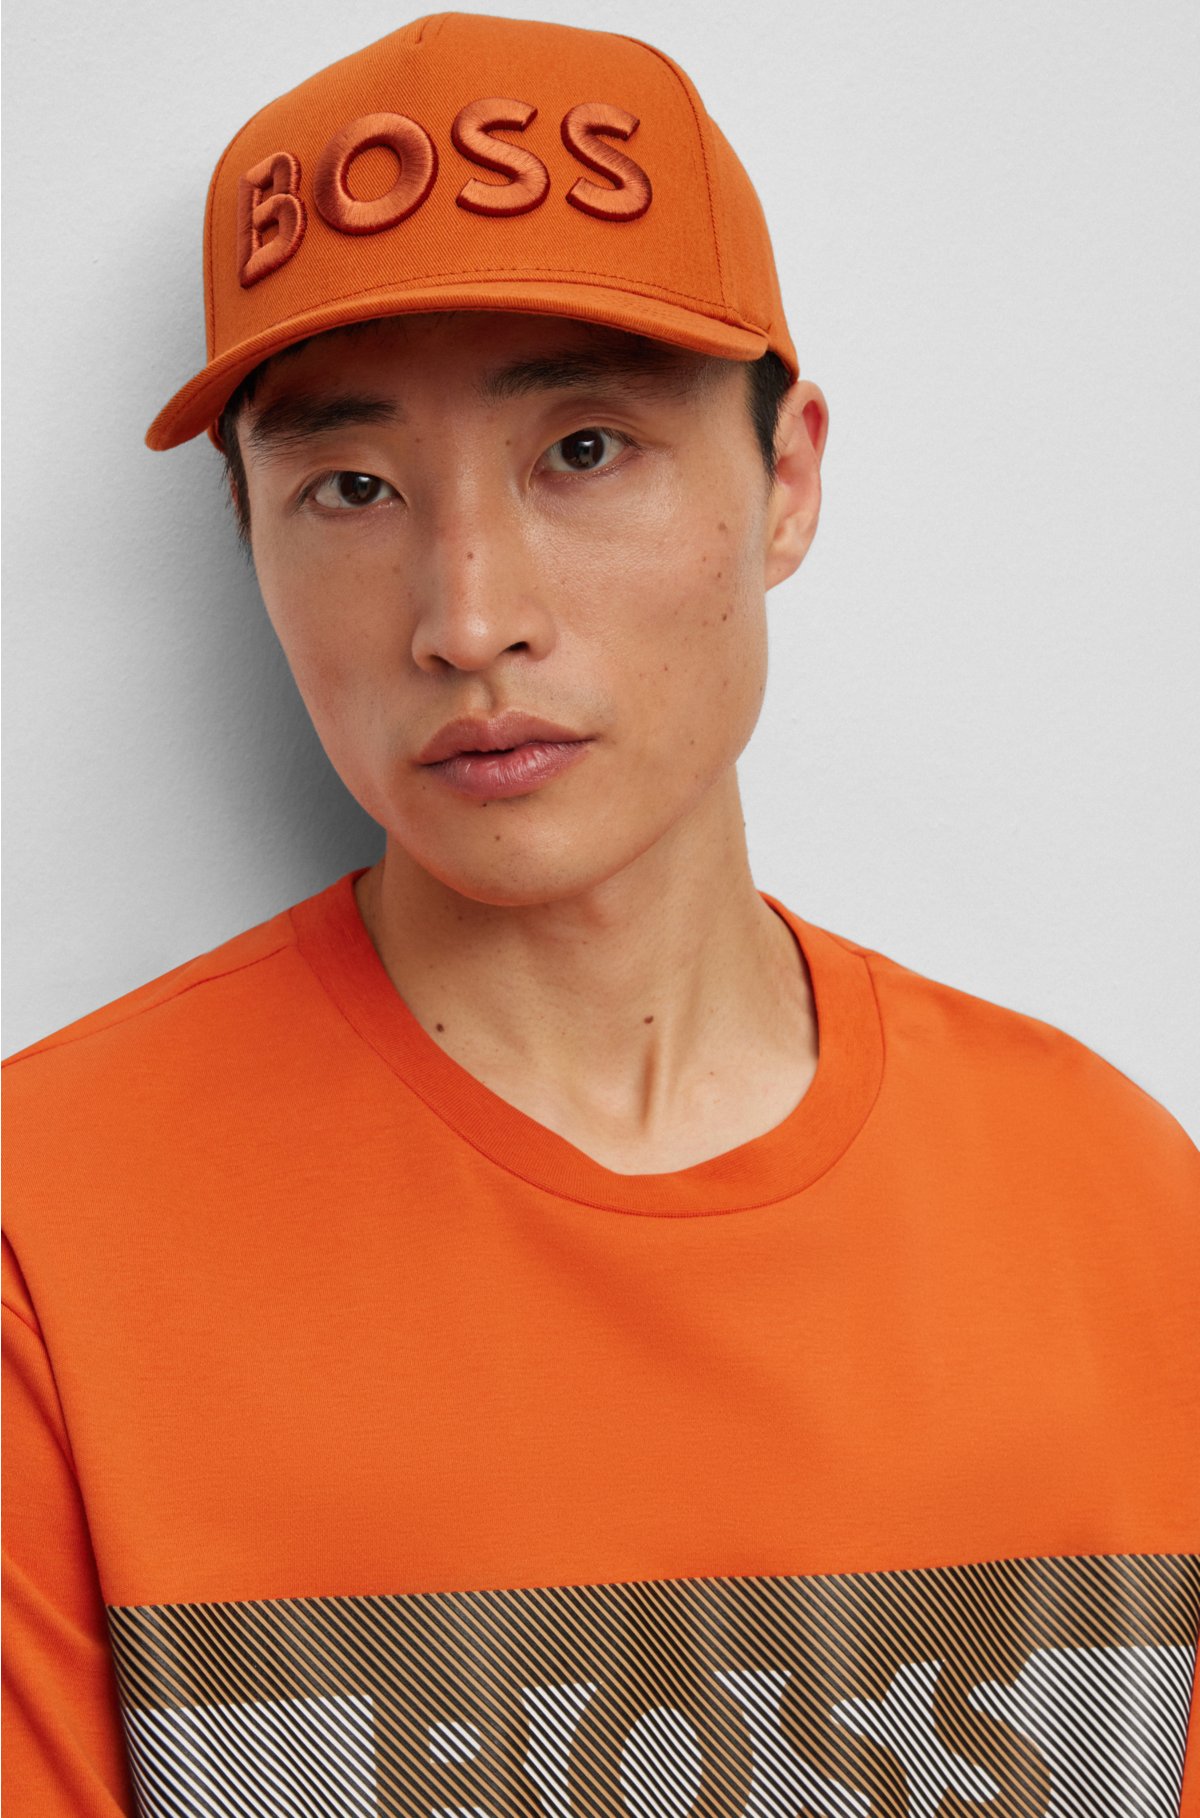 BOSS - Cotton-twill logo cap and adjustable with strap embroidered